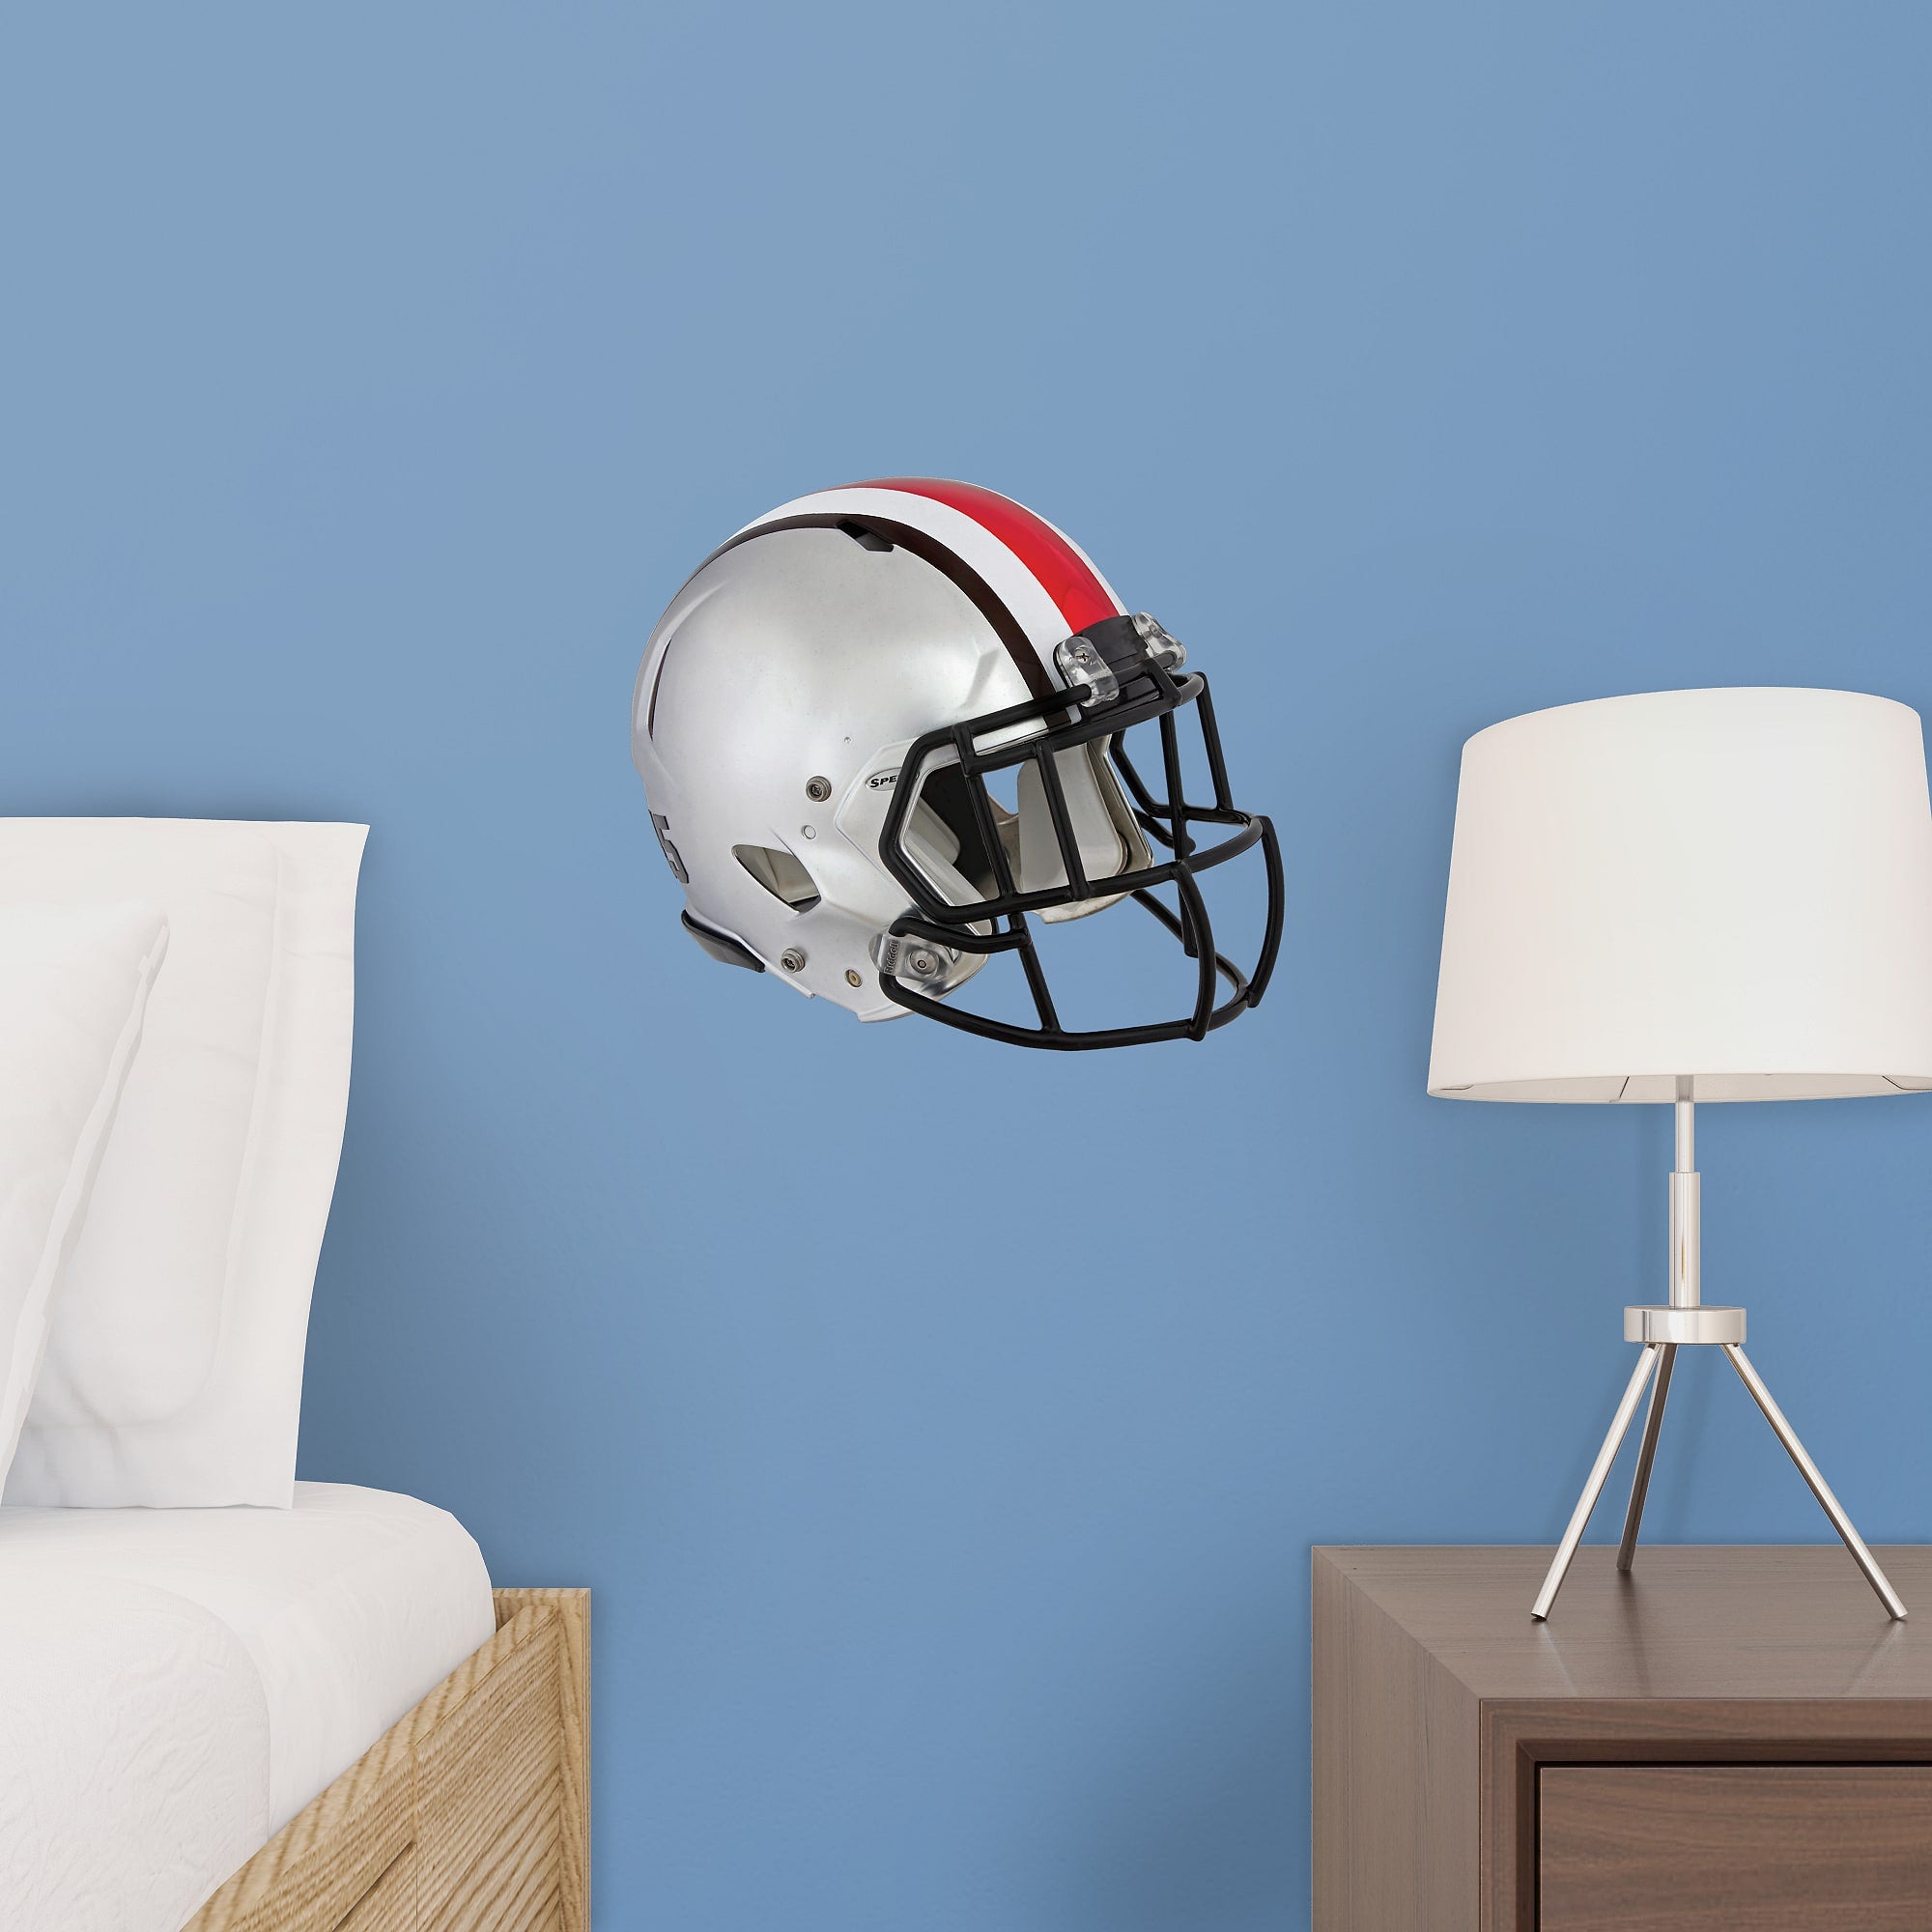 Ohio State Buckeyes: Rivalry Helmet - Officially Licensed Removable Wall Decal 12.0"W x 11.0"H by Fathead | Vinyl